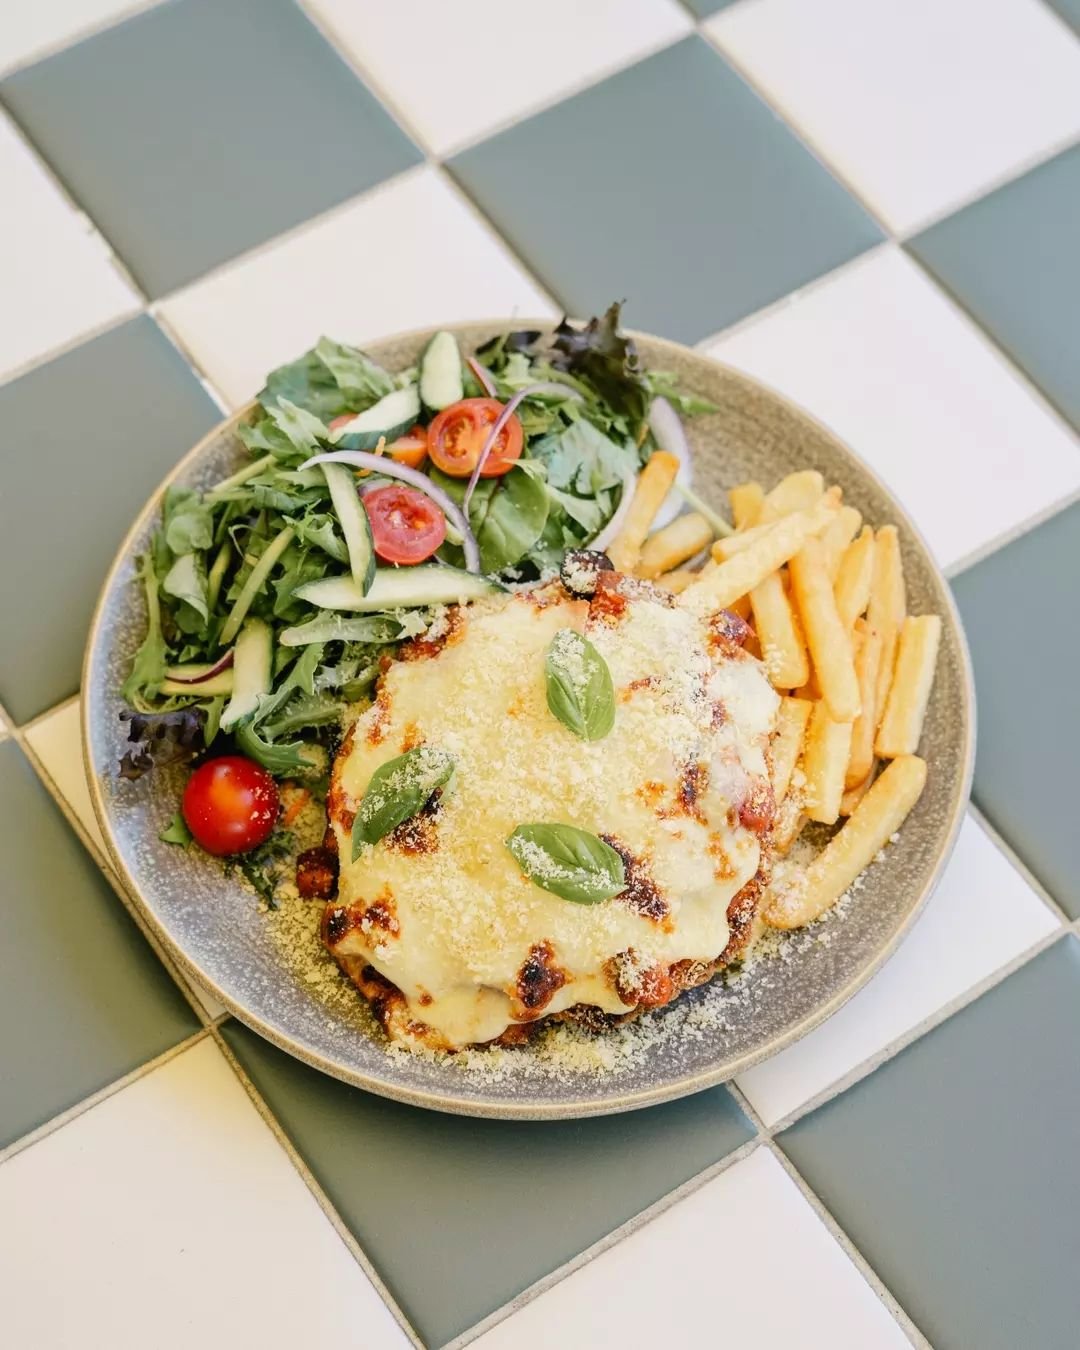 Don't miss our new&nbsp;Mediterranean Parmi!&nbsp;

Join us tomorrow for Parmi Day and indulge in all the Mediterranean goodness, for just $23&nbsp;🍽️

Book your table now through the link in our bio.